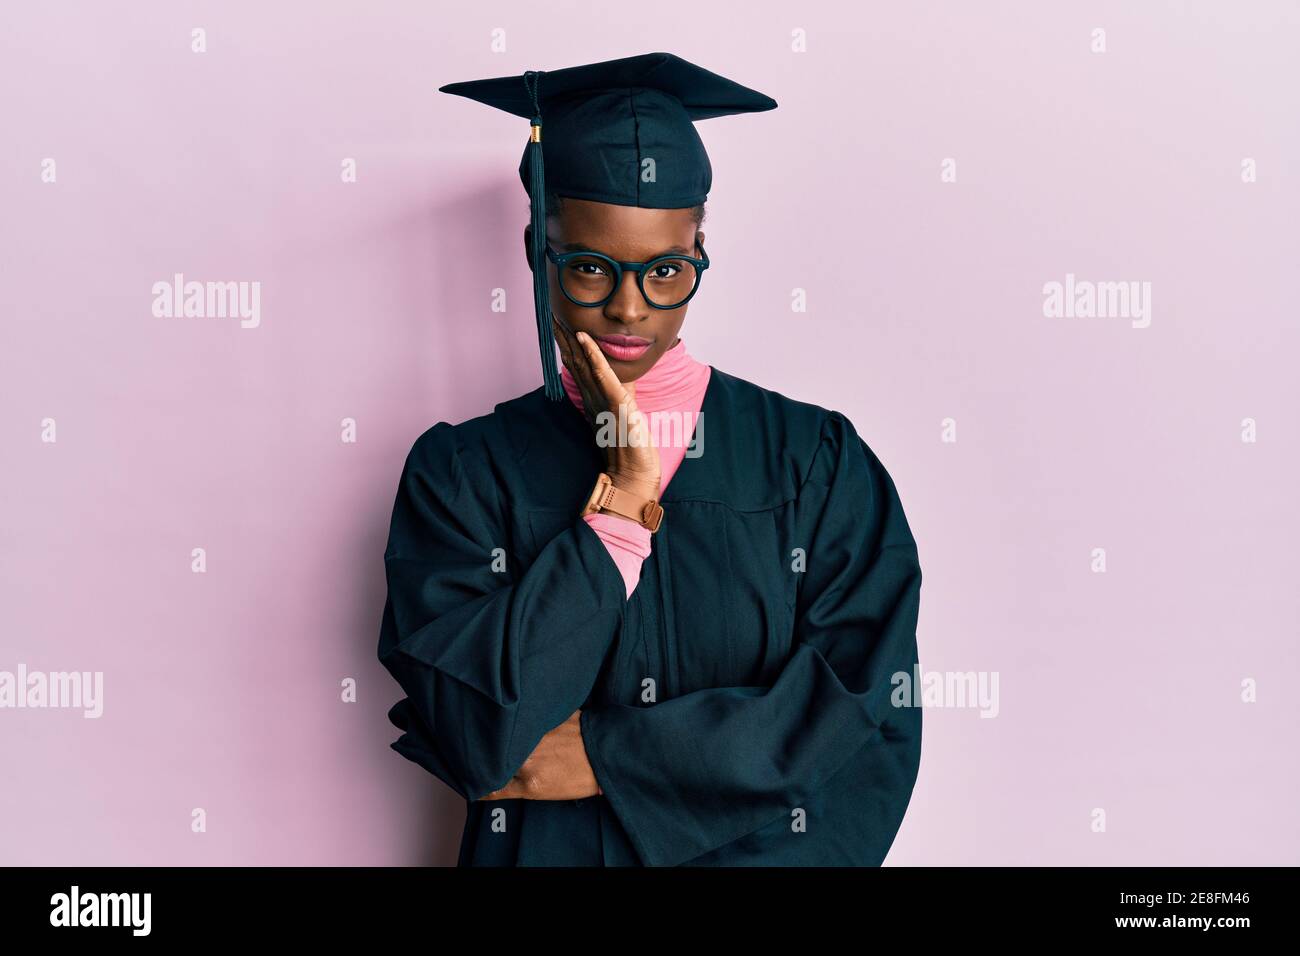 Young african american girl wearing graduation cap and ceremony robe thinking looking tired and bored with depression problems with crossed arms. Stock Photo